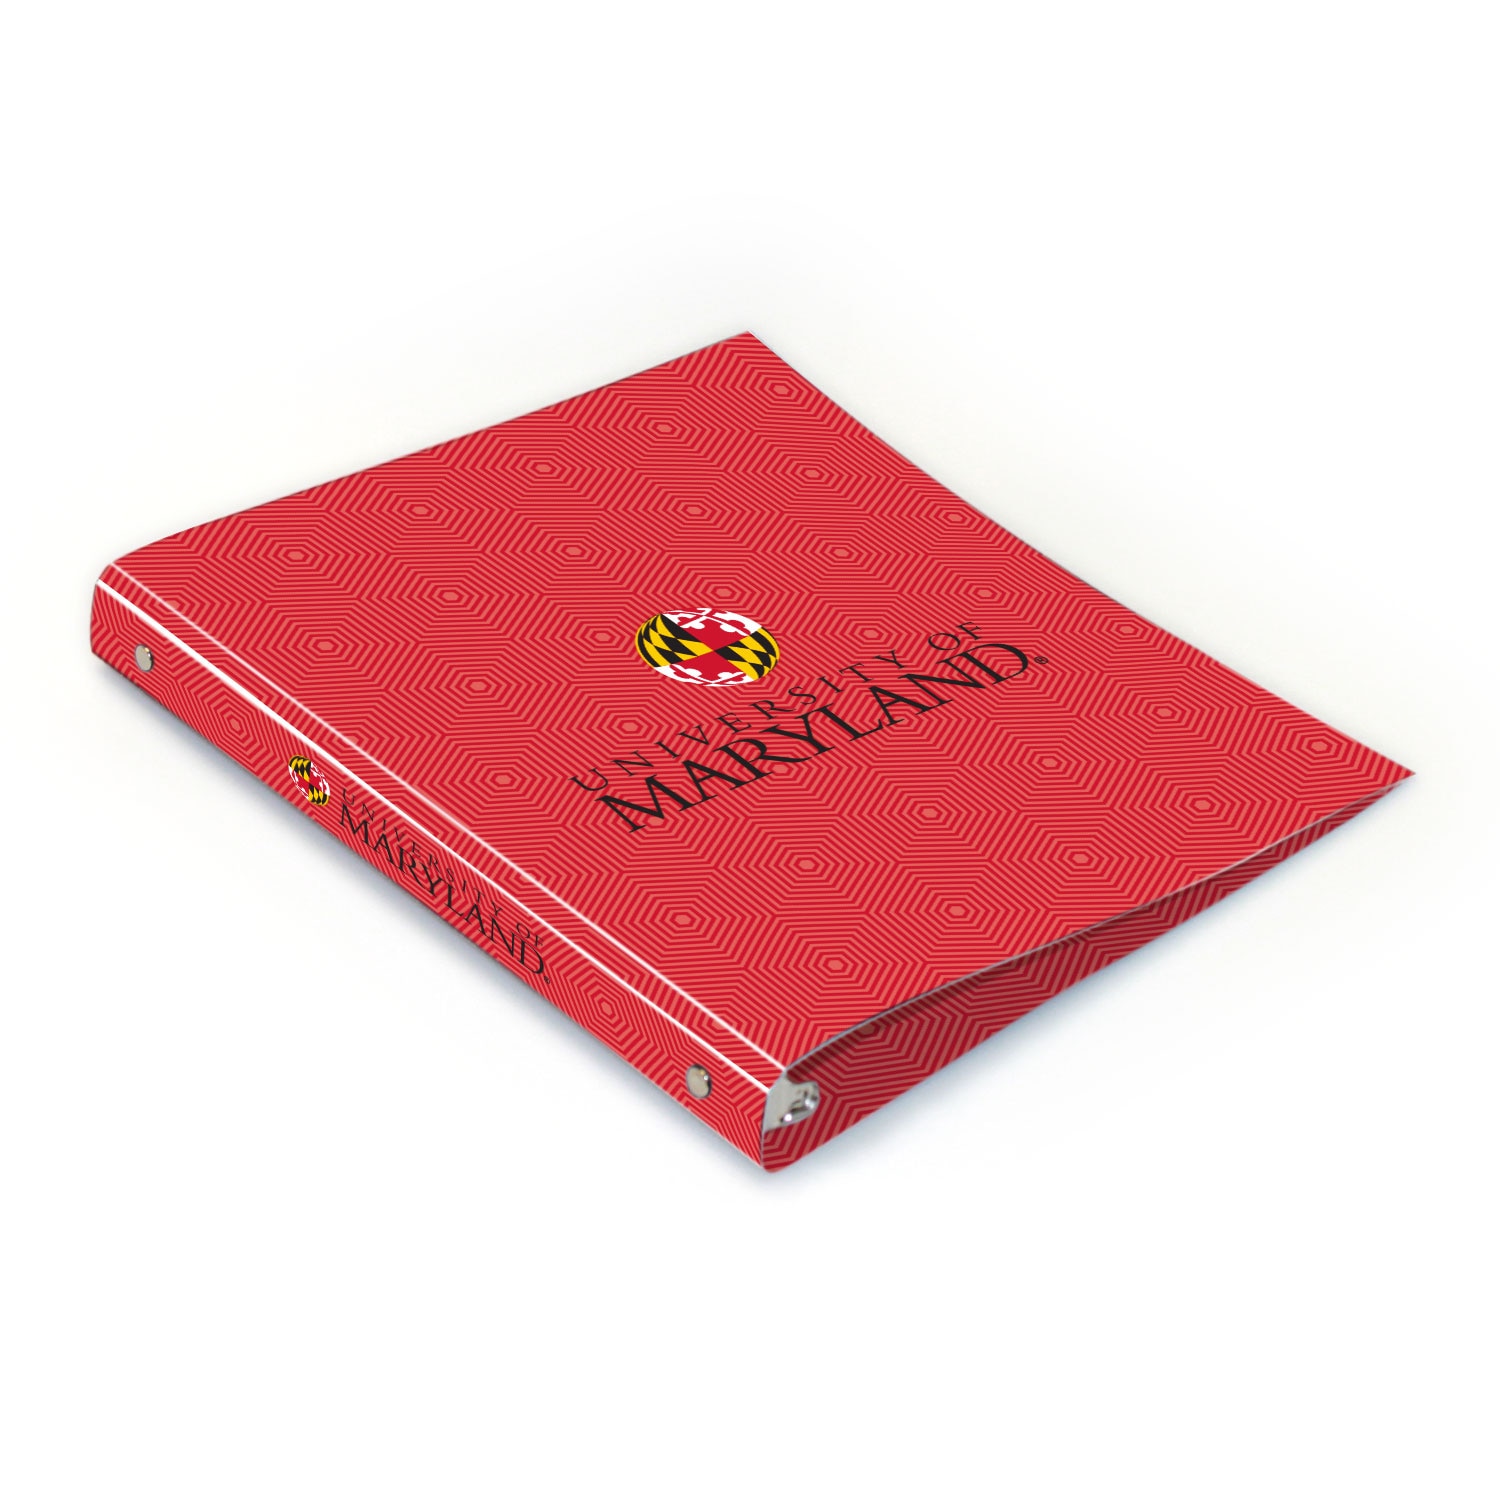 University of Maryland College Park Full Color 2 sided Imprinted Flexible 1" Logo 1 Binder 10.5" x 11.5"